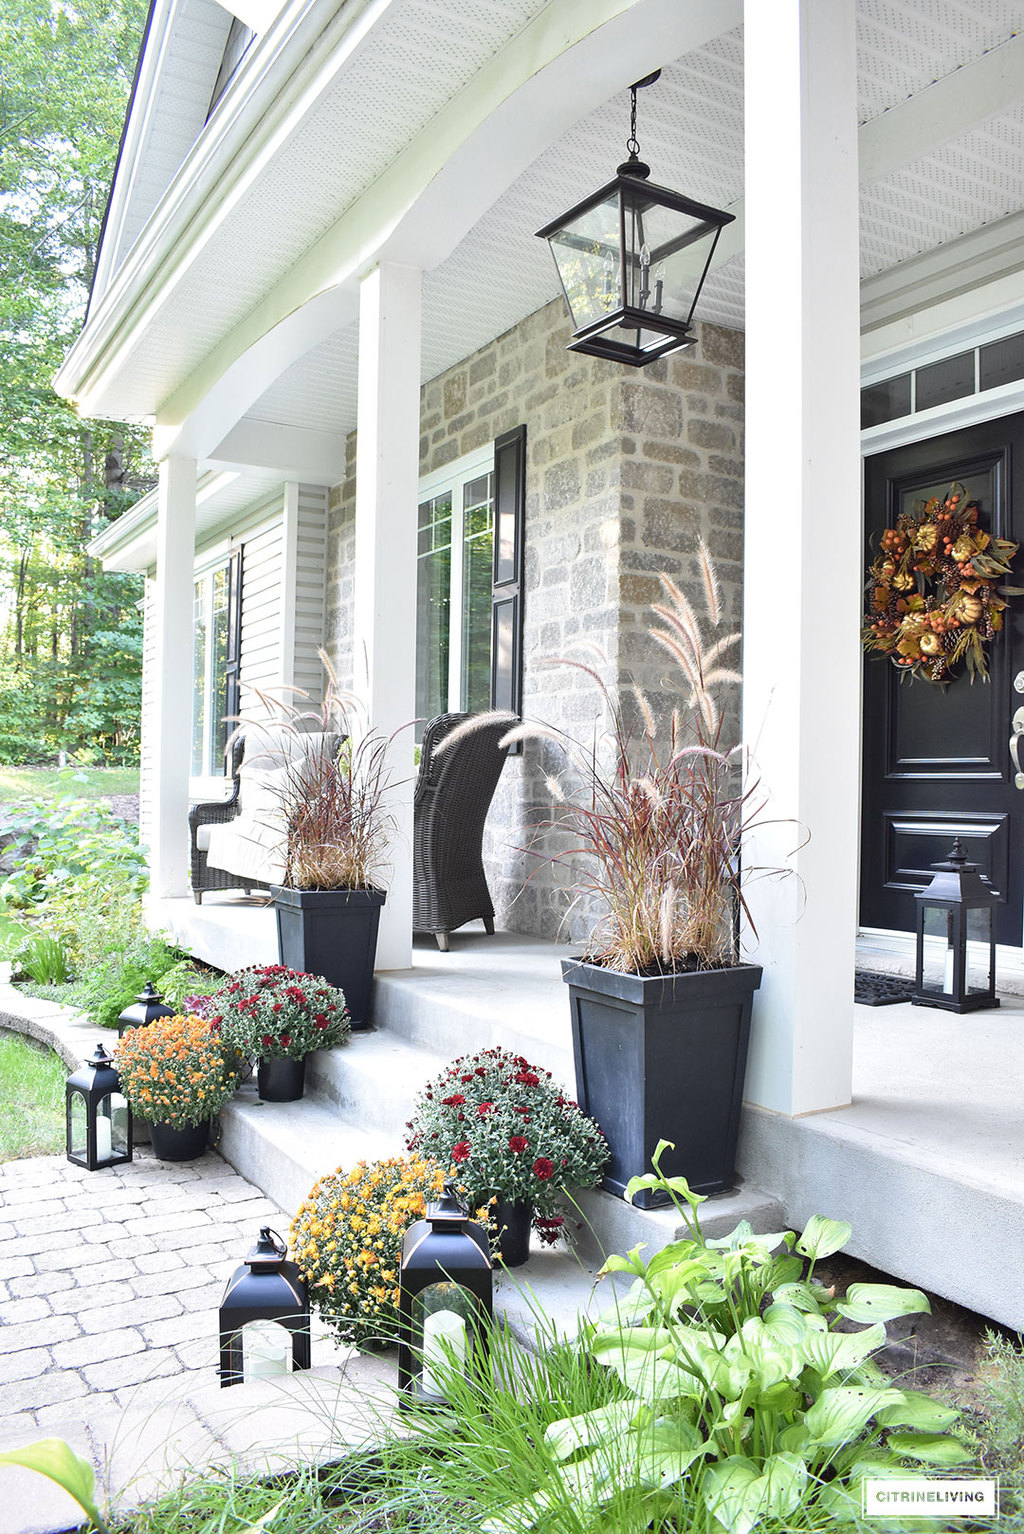 A simple and elegant front porch decorated for Fall with seasonal flowers in autumnal colors, and a sophisticated overscale wreath for the front door.